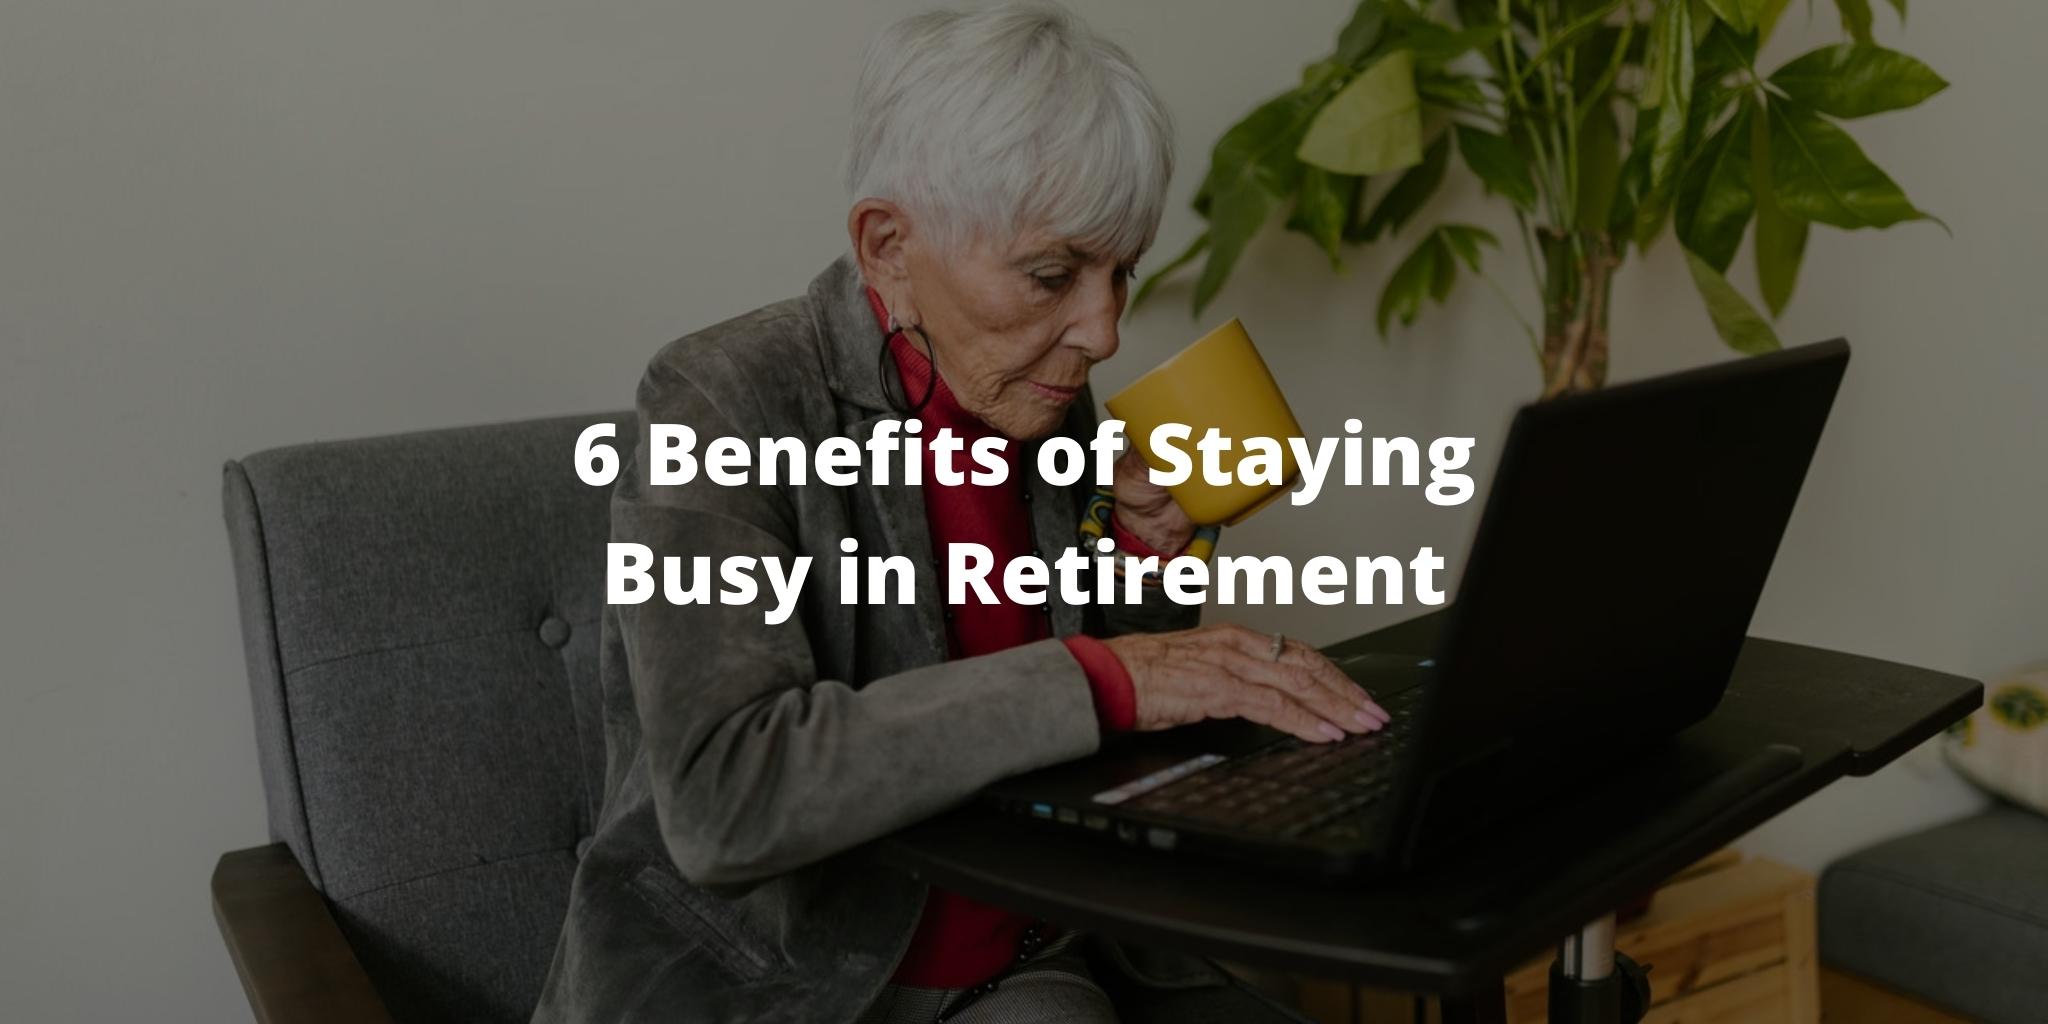 6 Benefits of Staying Busy in Retirement